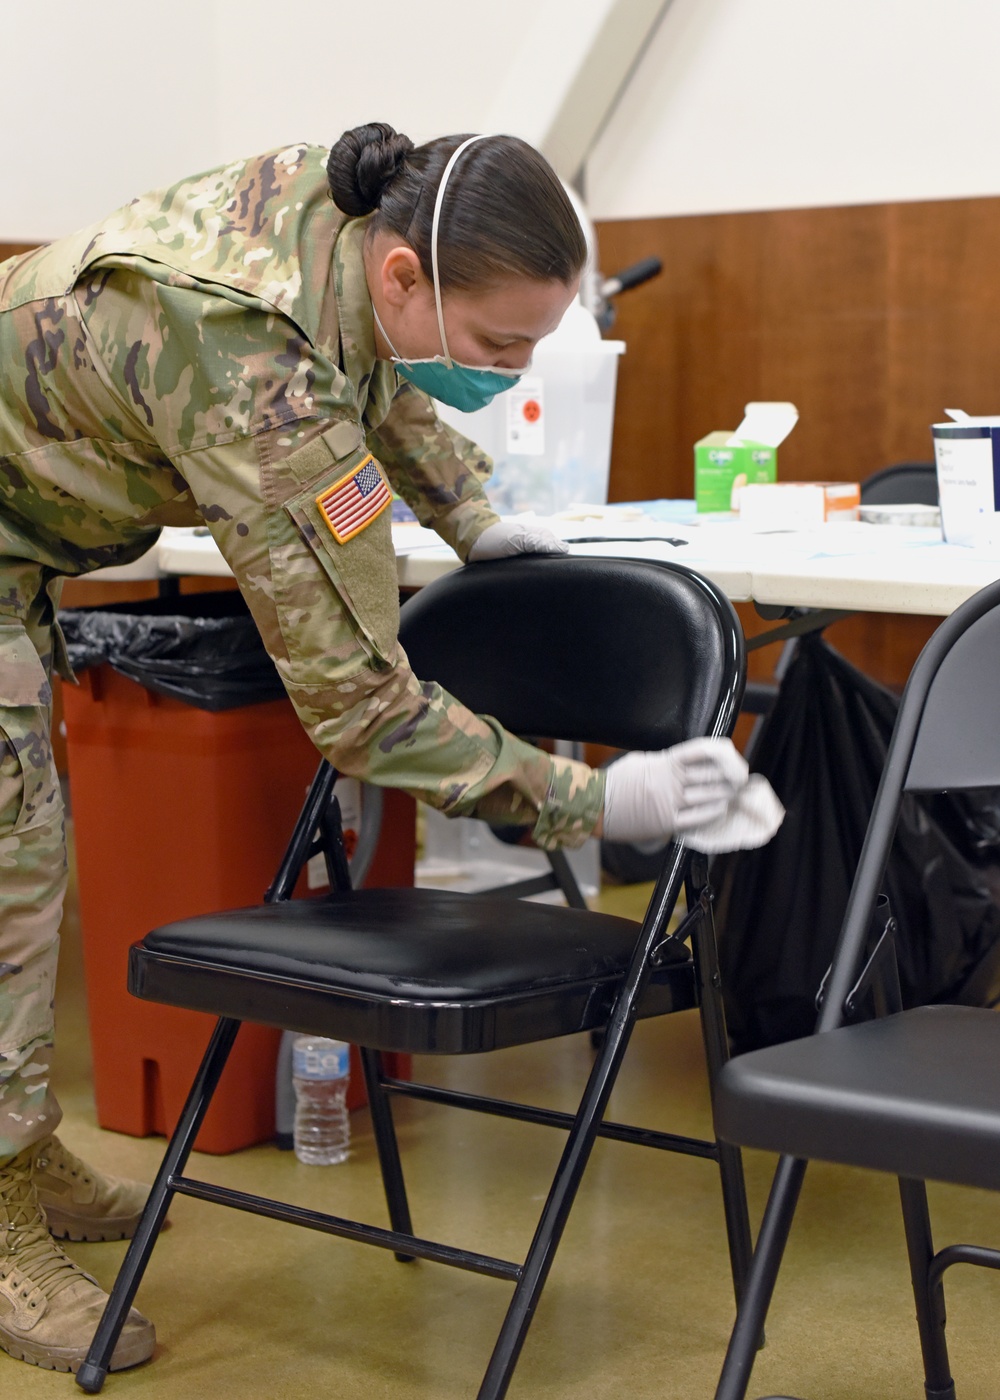 Flu vaccine campaign underway at Fort Bliss